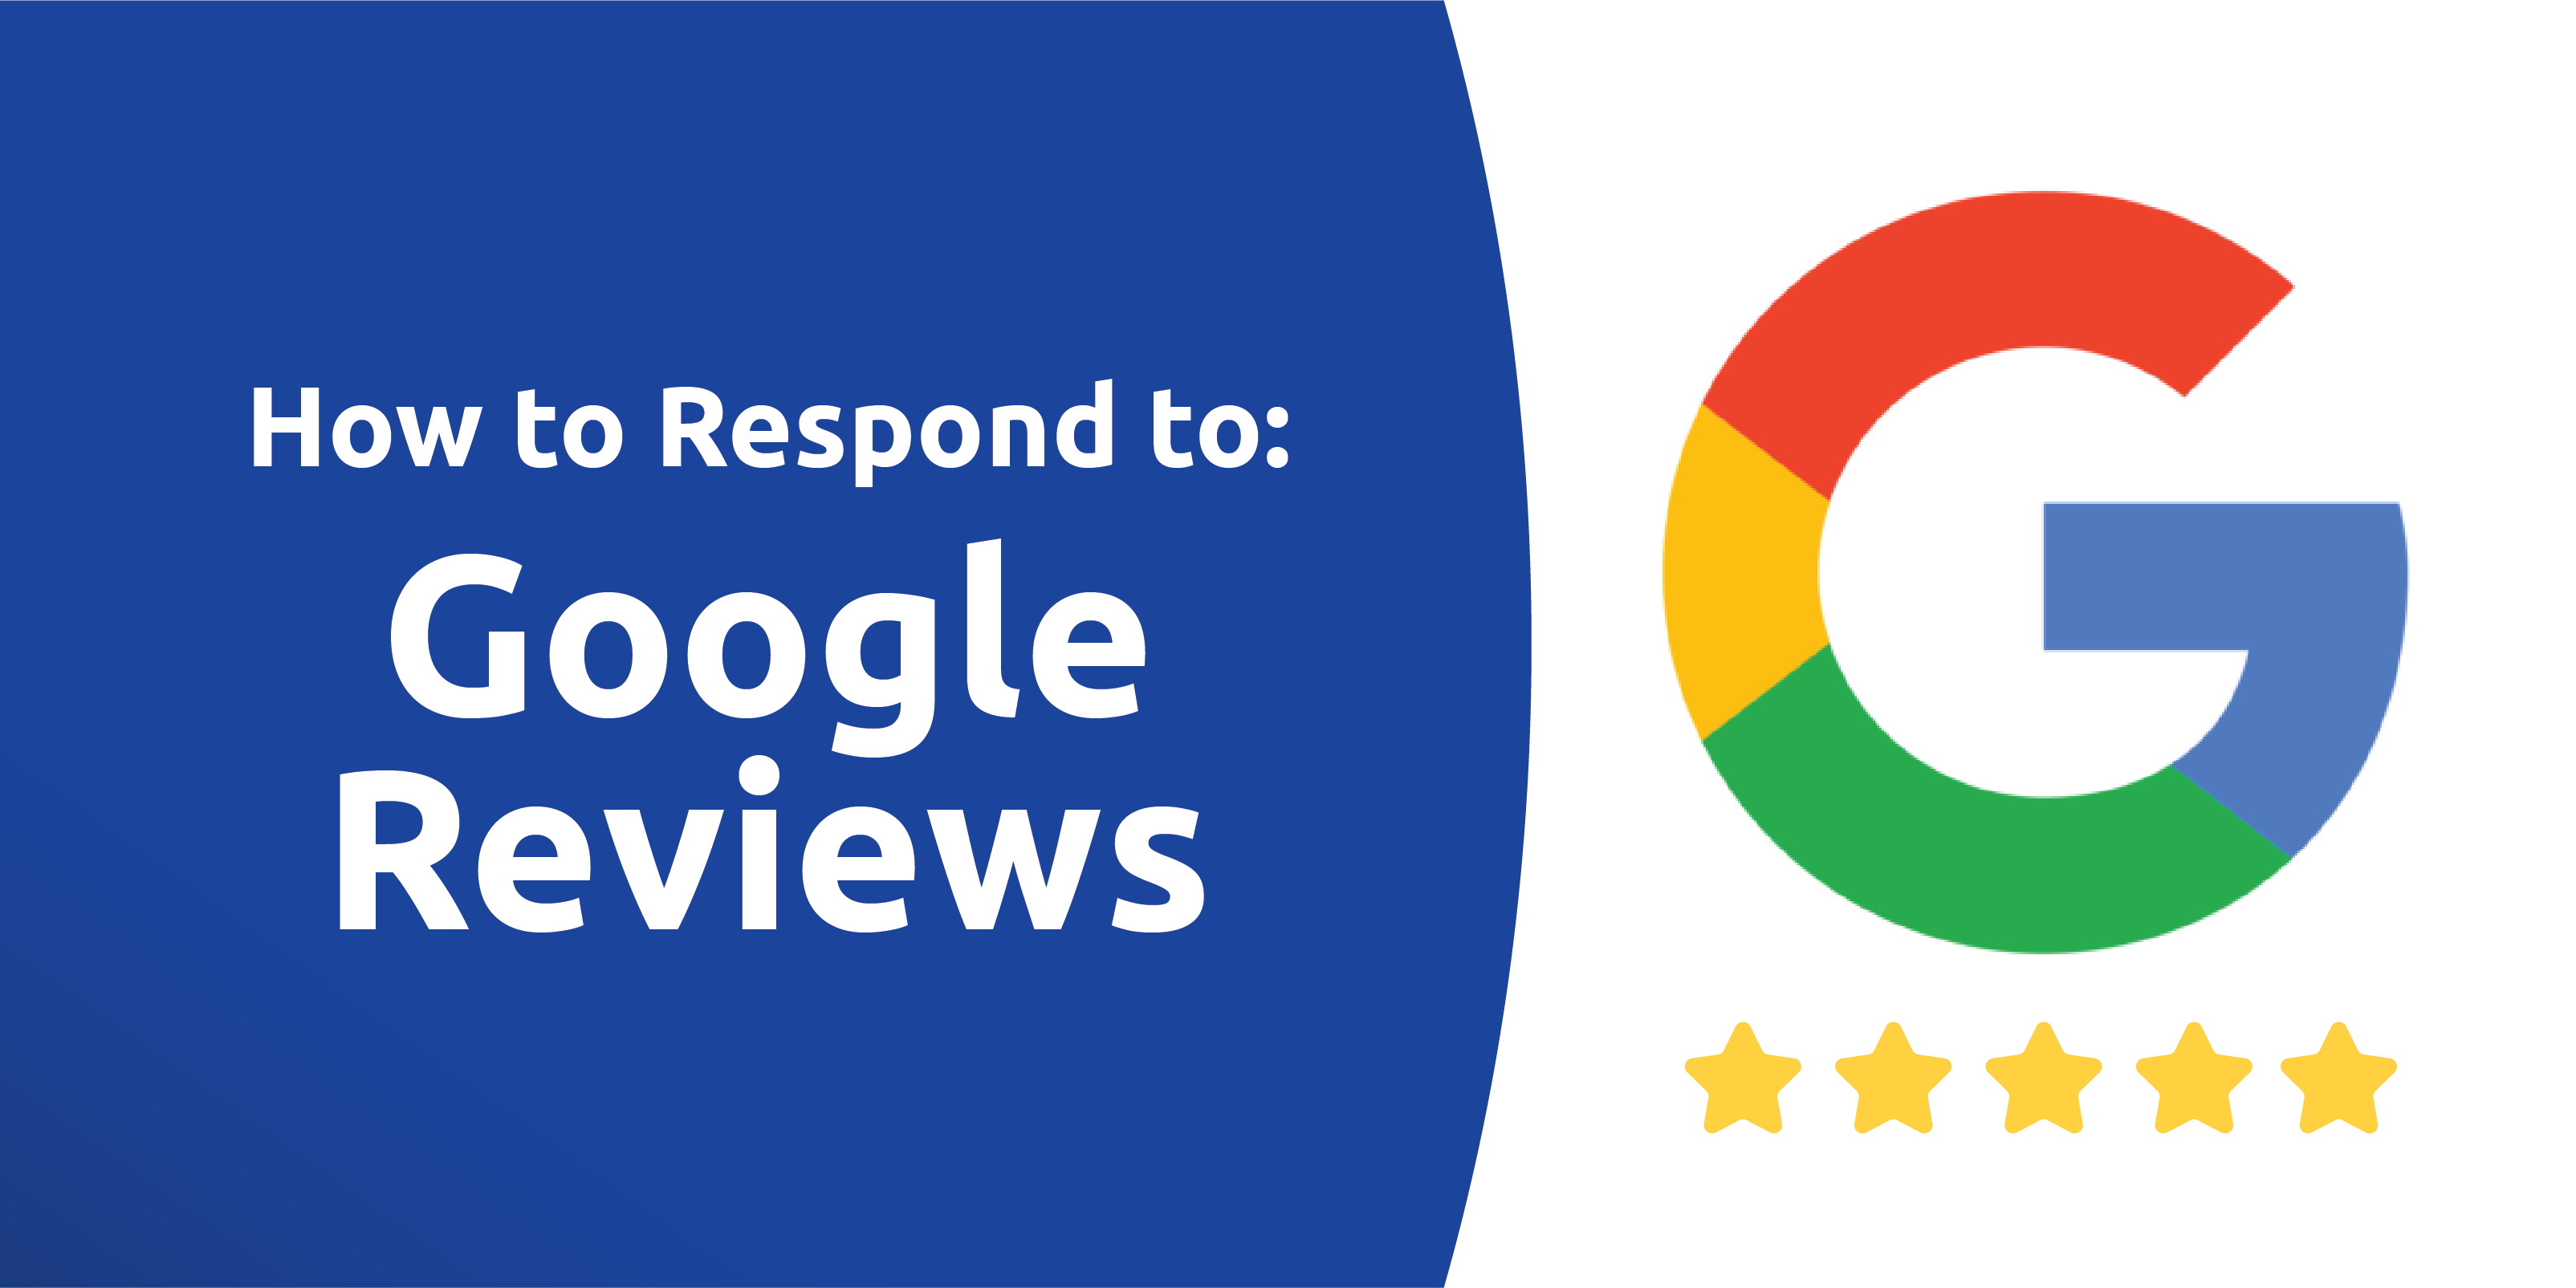 5 Ways To Respond to Google Reviews – Both Negative and Positive